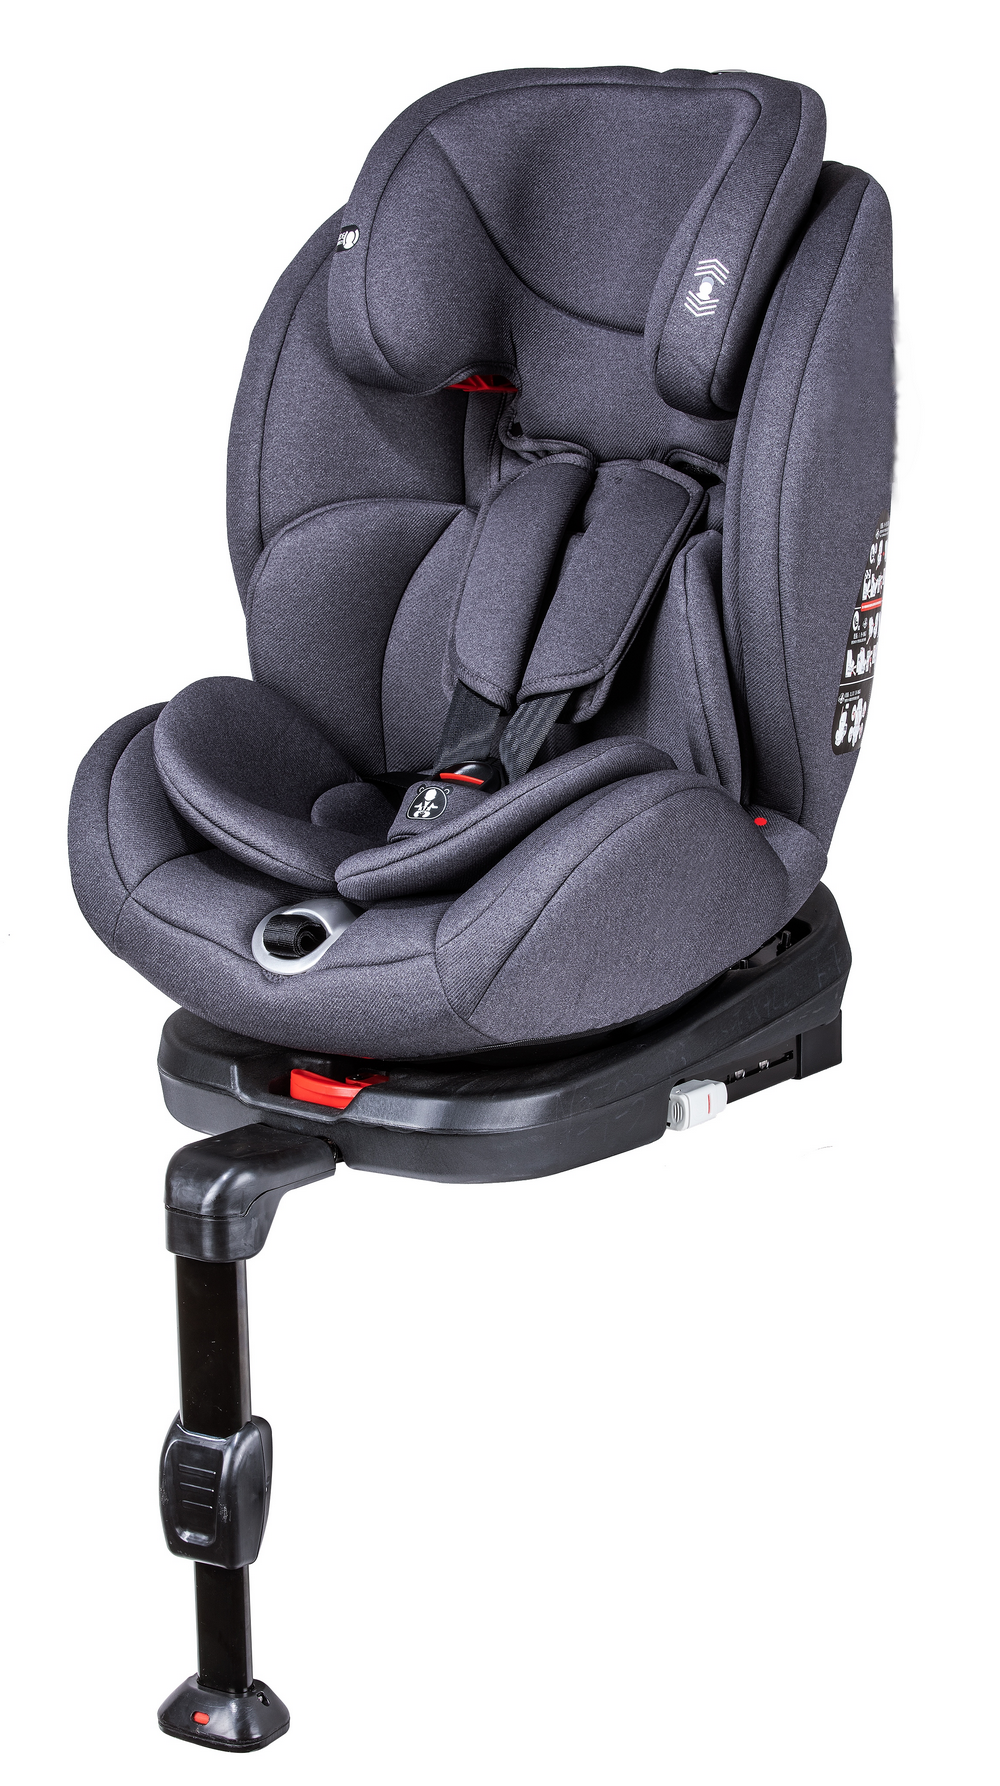 Side Impact Protection Big 12 Year Old Baby Car Seat